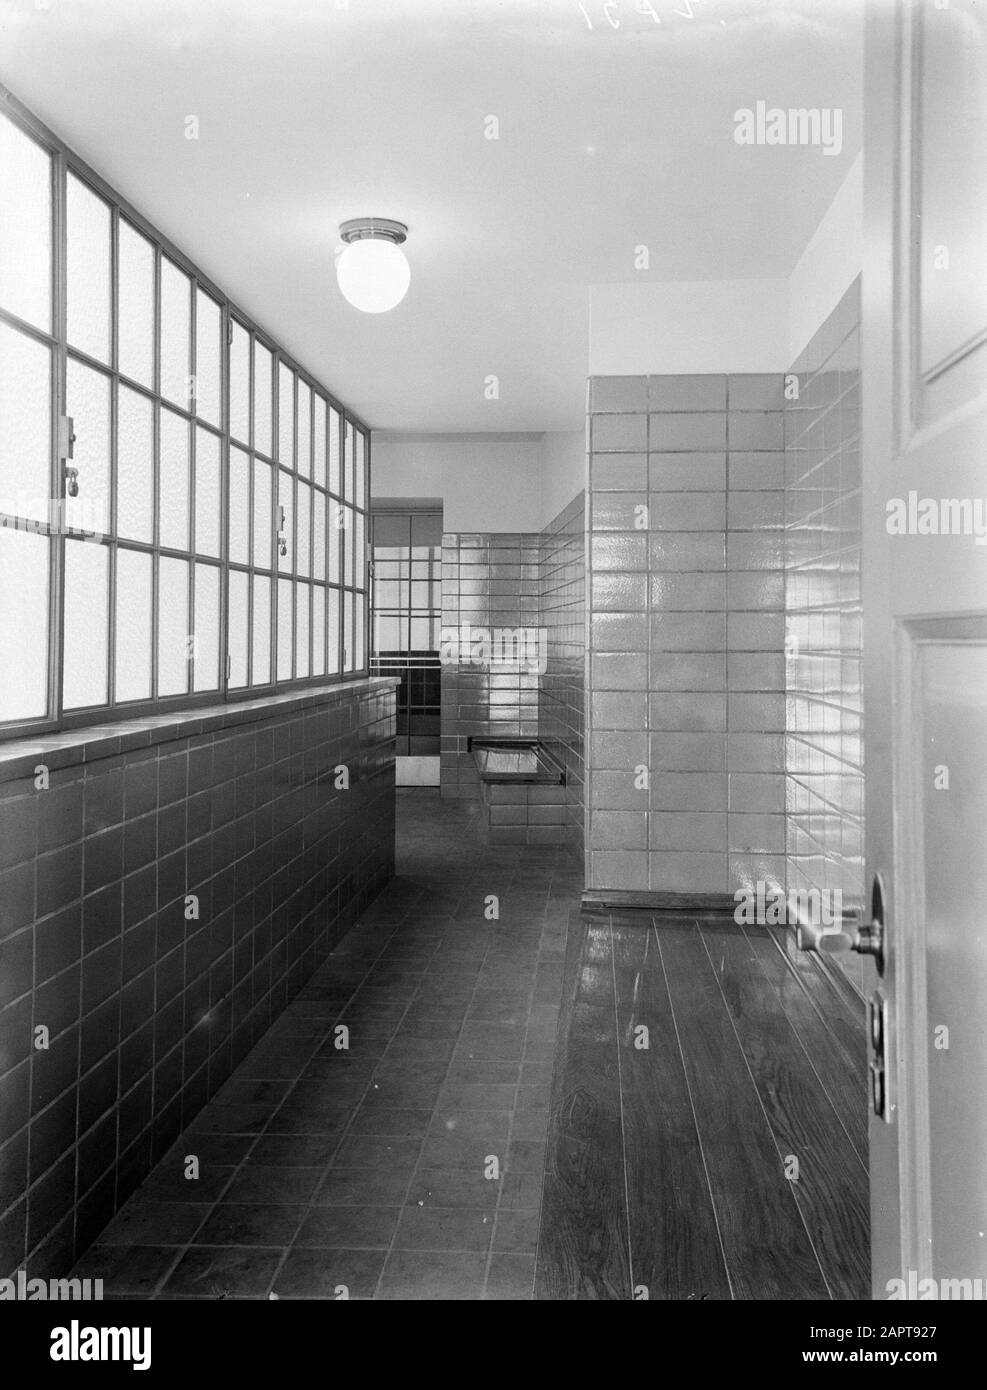 Reportage Kasvereeniging Amsterdam  Corridor between expedition room and large stairwell Annotation: The Kasvereeniging was and is located at Spuistraat 172 in Amsterdam. In 1952 the name changed to Kas-Associatie, nowadays the bank is called KAS BANK Date: 1933 Location: Amsterdam, Noord-Holland Stock Photo